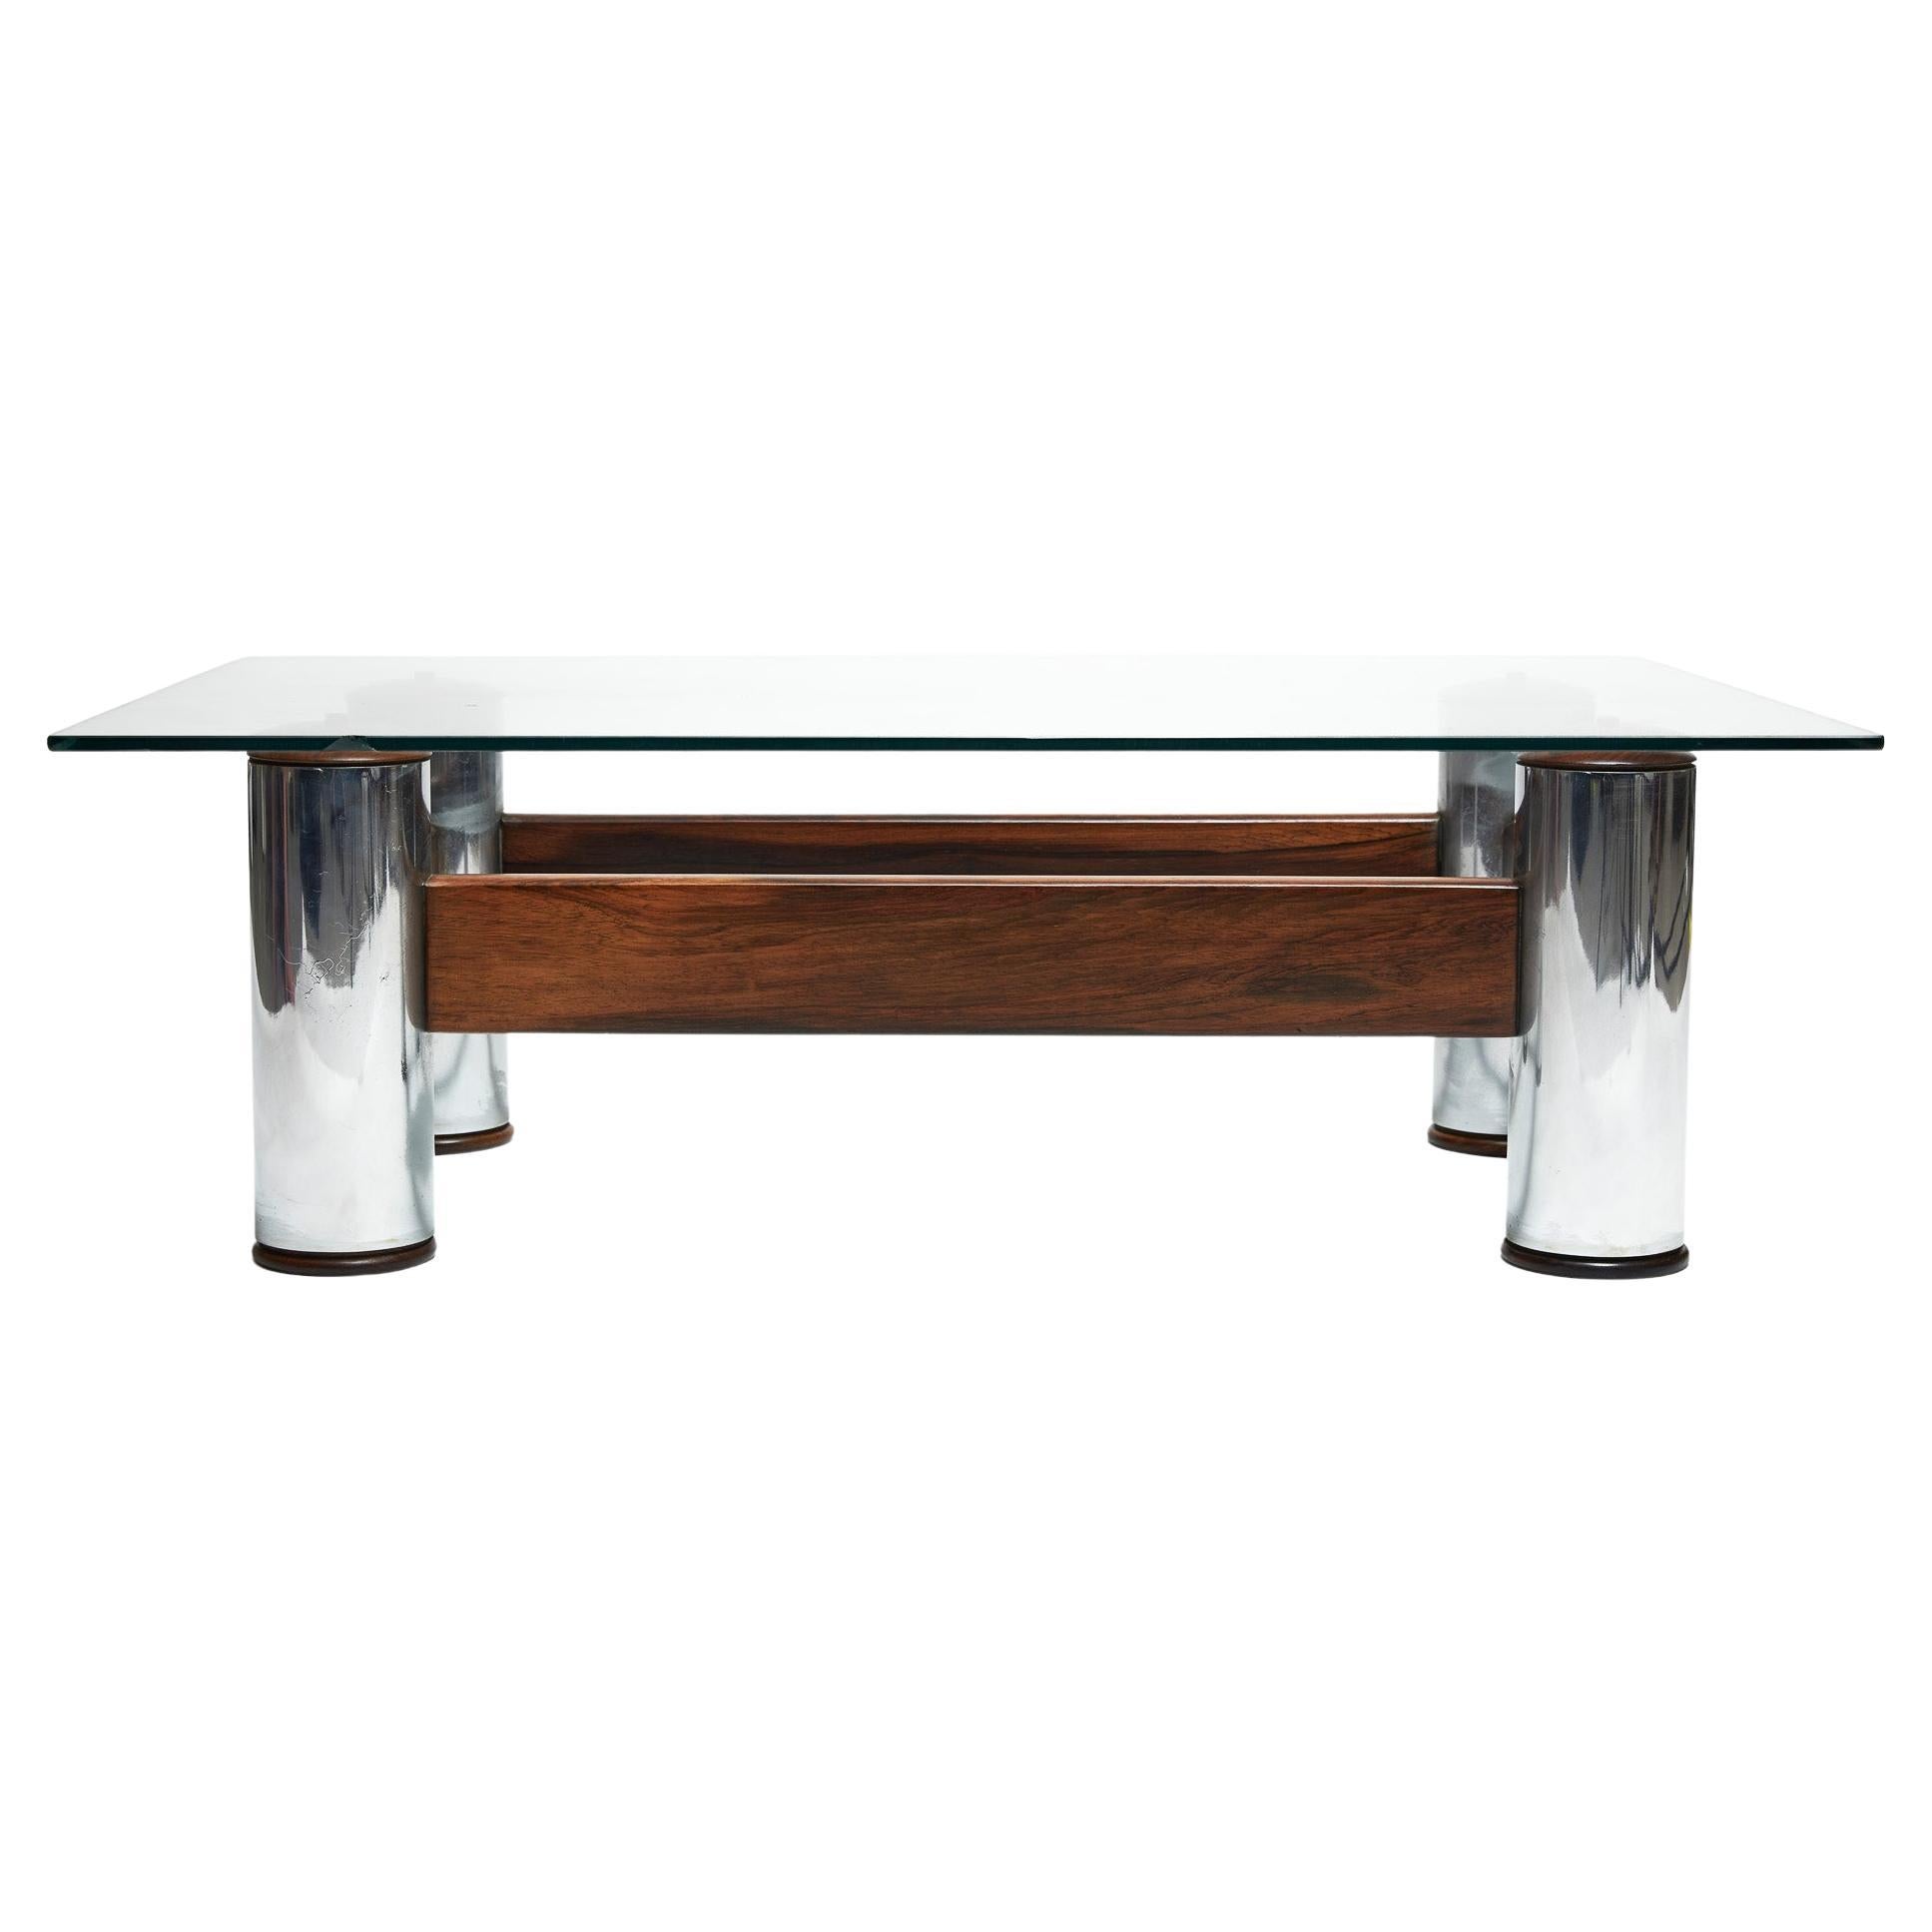 Midcentury ModeCoffee Table in Hardwood & Chrome by Sergio Rodrigues 1965 Brazil For Sale